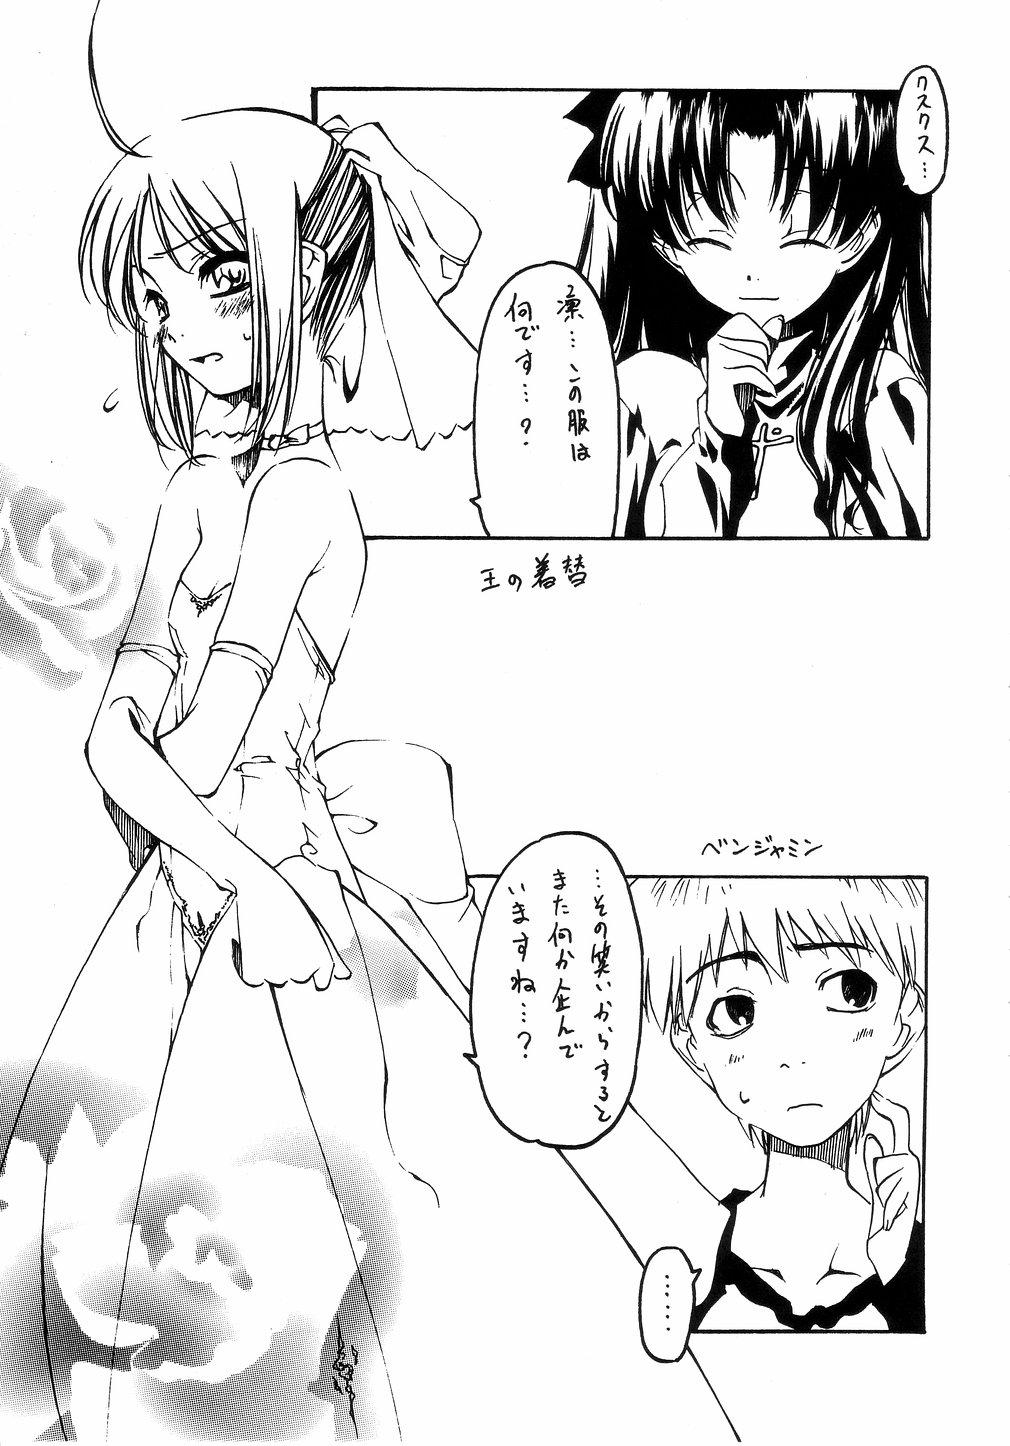 Tiny Titties Ou no Kigae - Fate stay night Work - Page 4